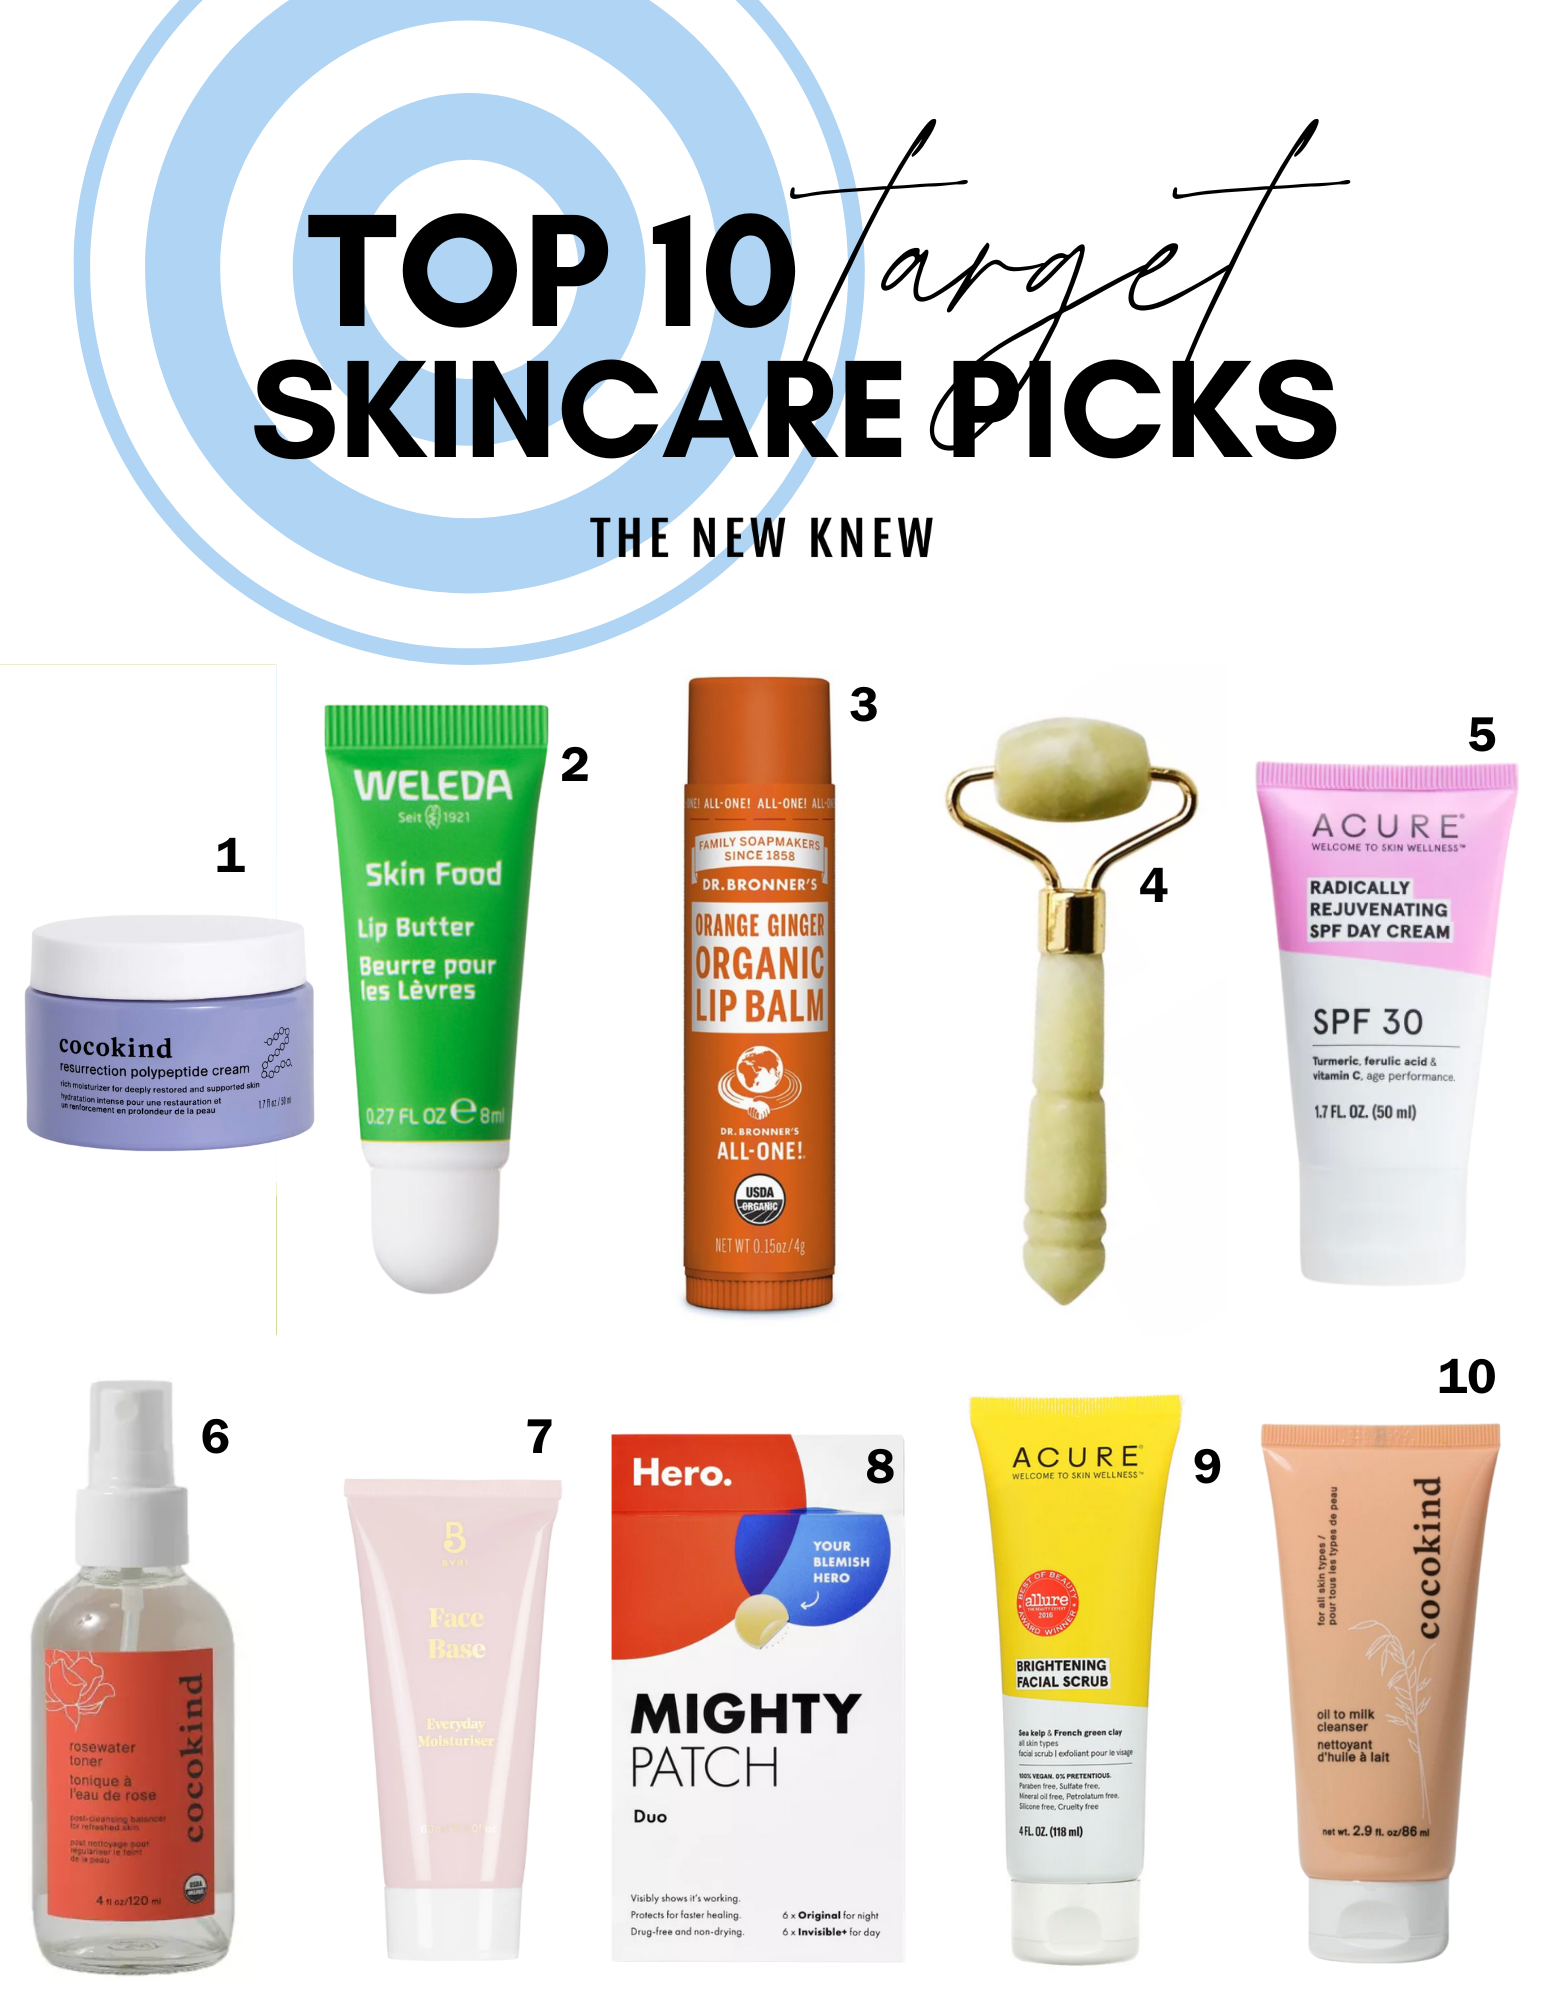 Top 10 Target Skincare picks by TNK.